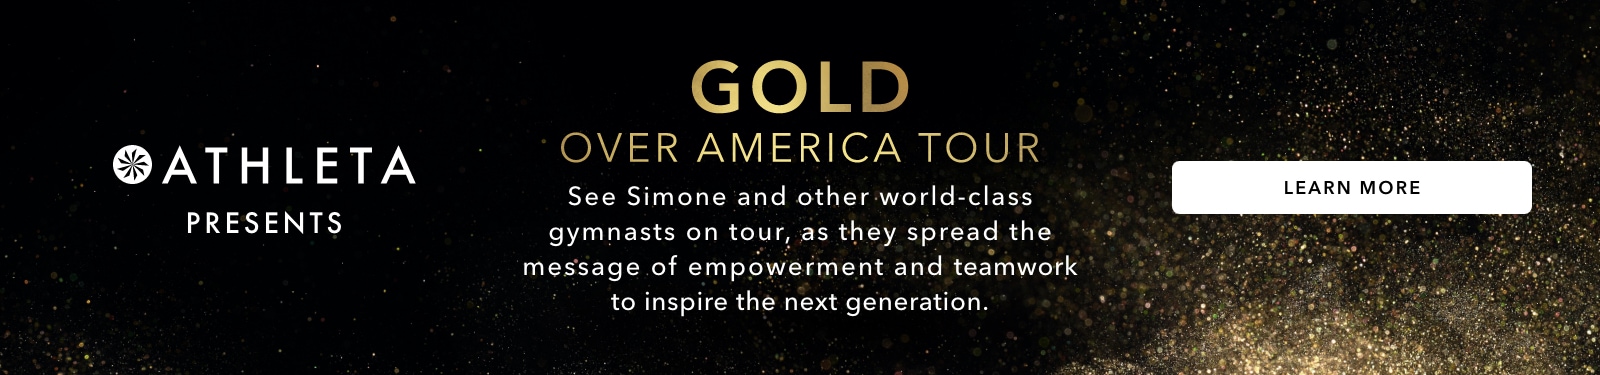 Athleta presents gold over america tour. See simone on tour with an all-start team of gymnasts, as they spread the message of empowerment and teamwork to inspire the next generation. Learn more